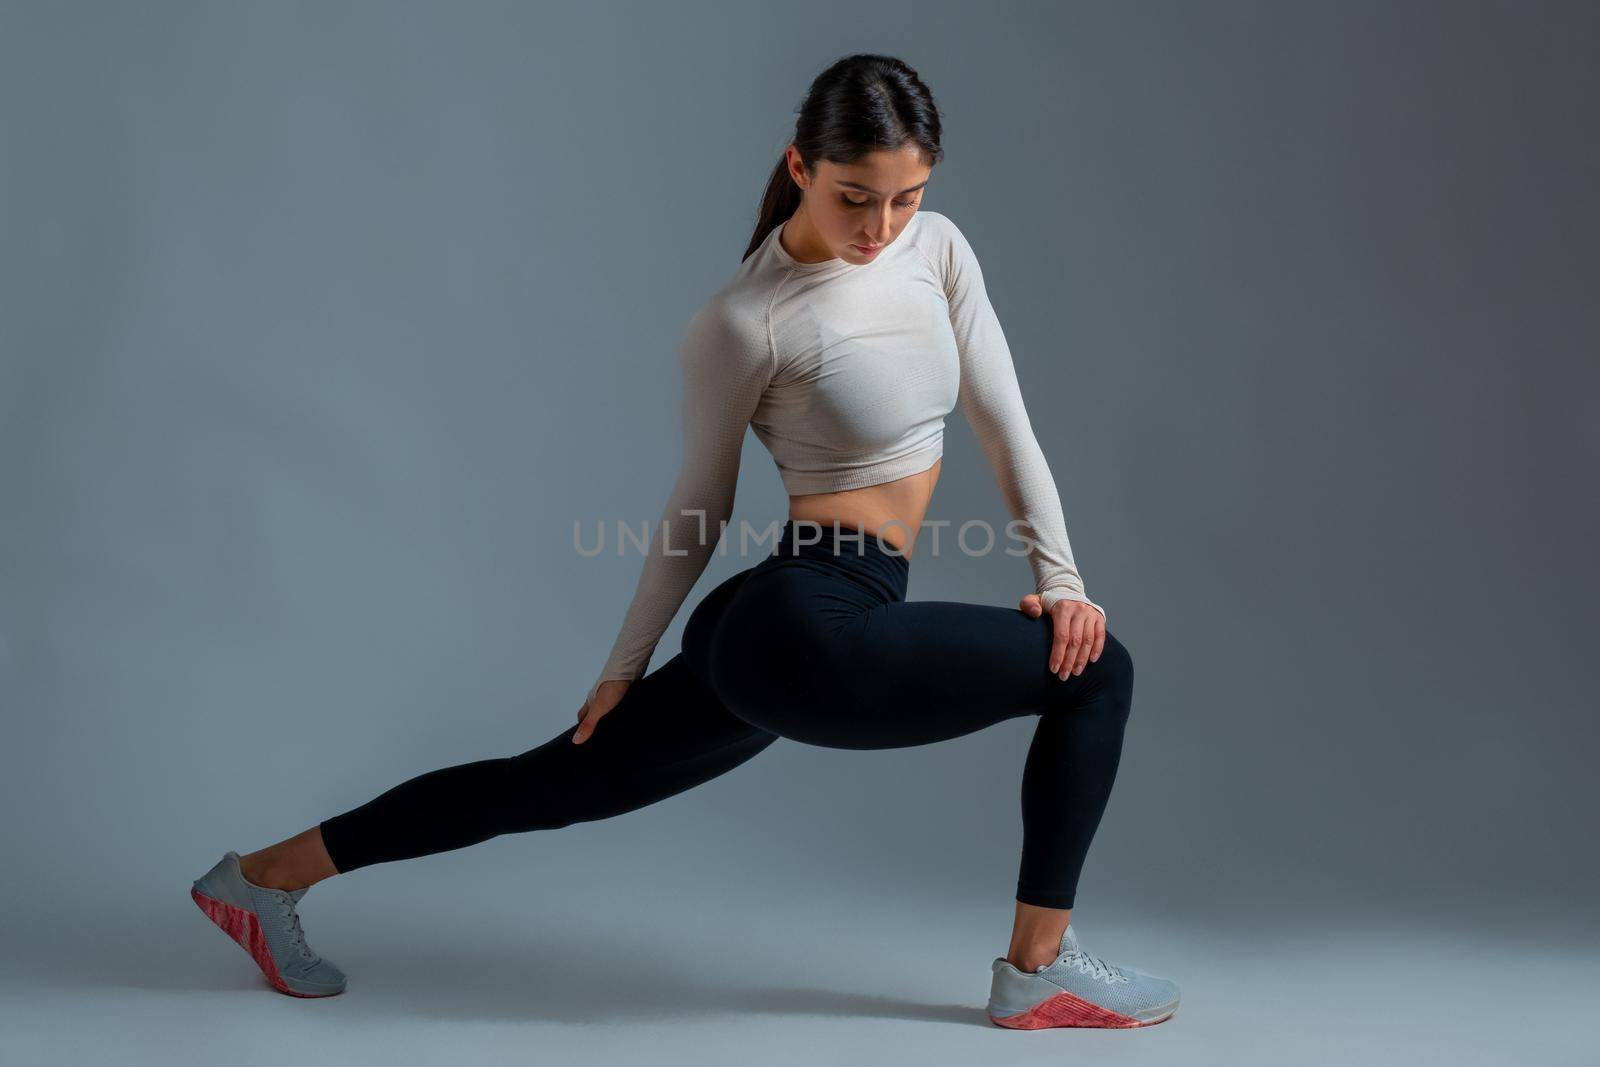 Girl performing lunges with body twists on grey background by nazarovsergey